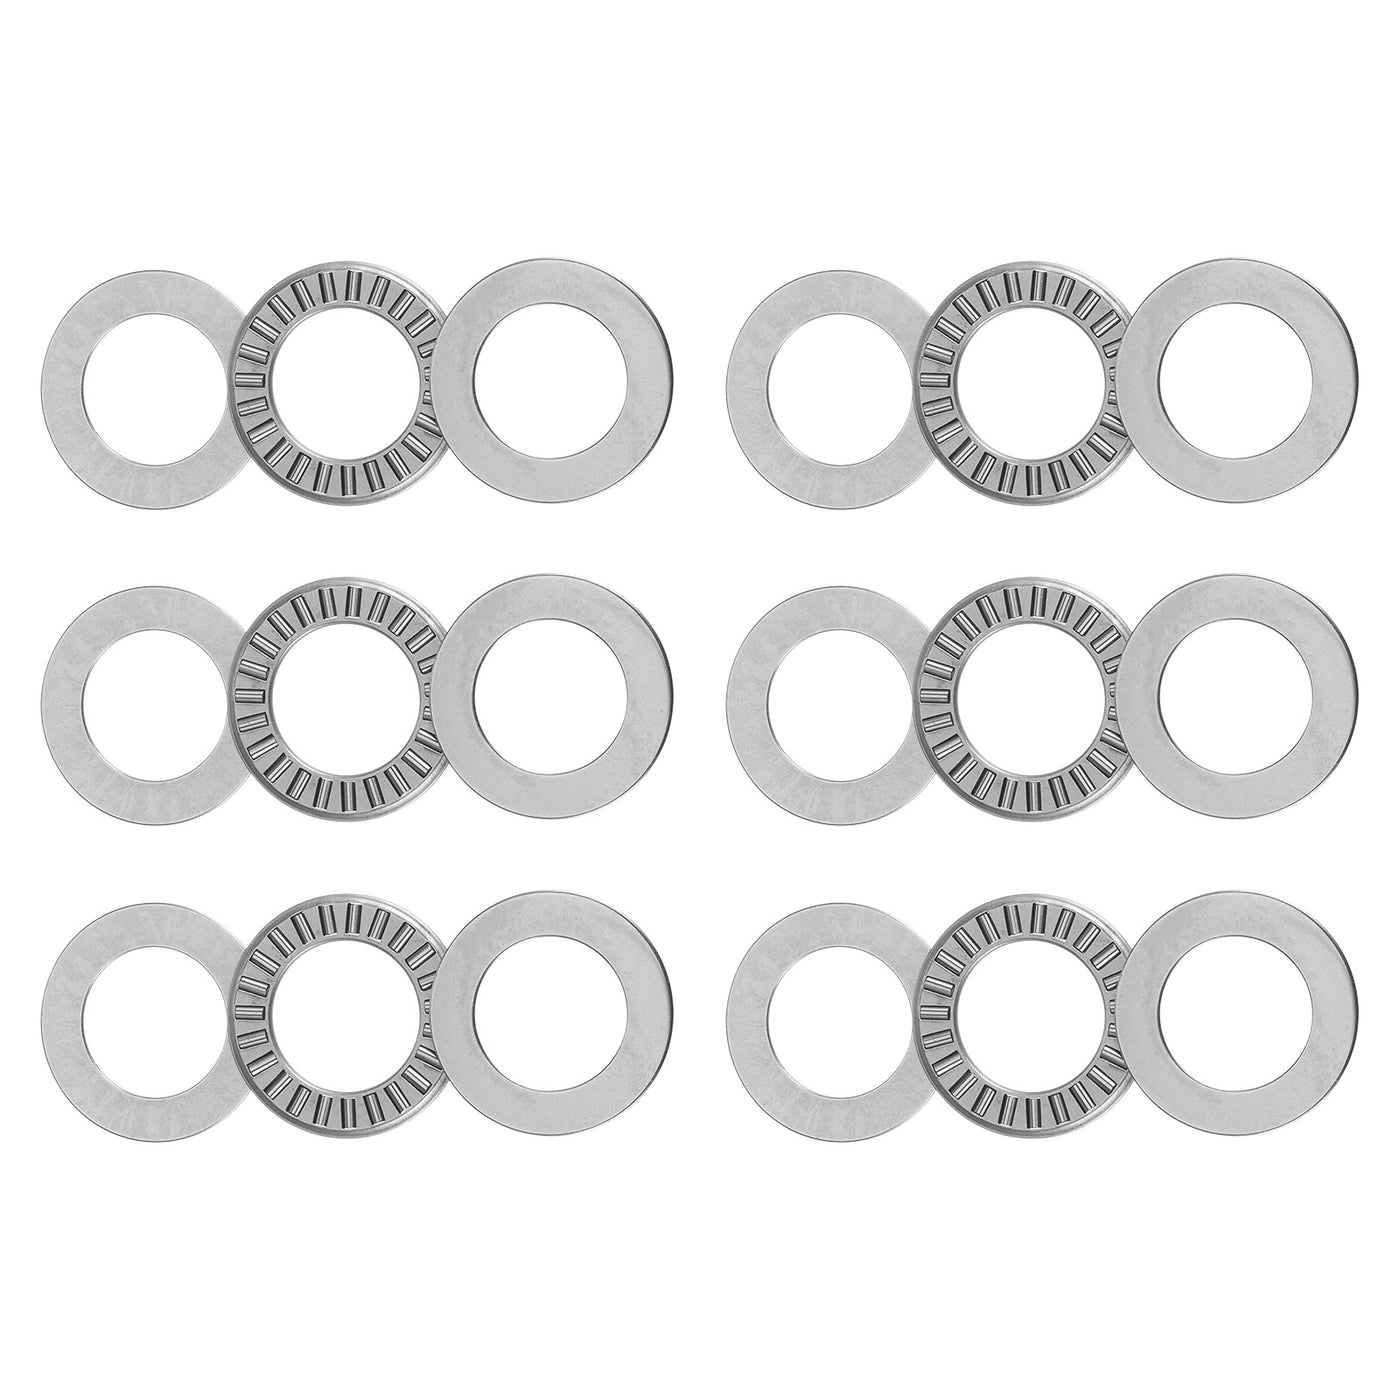 uxcell Uxcell NTA1220 Thrust Needle Roller Bearings 3/4"x1-1/4"x5/64" with Washers 6pcs